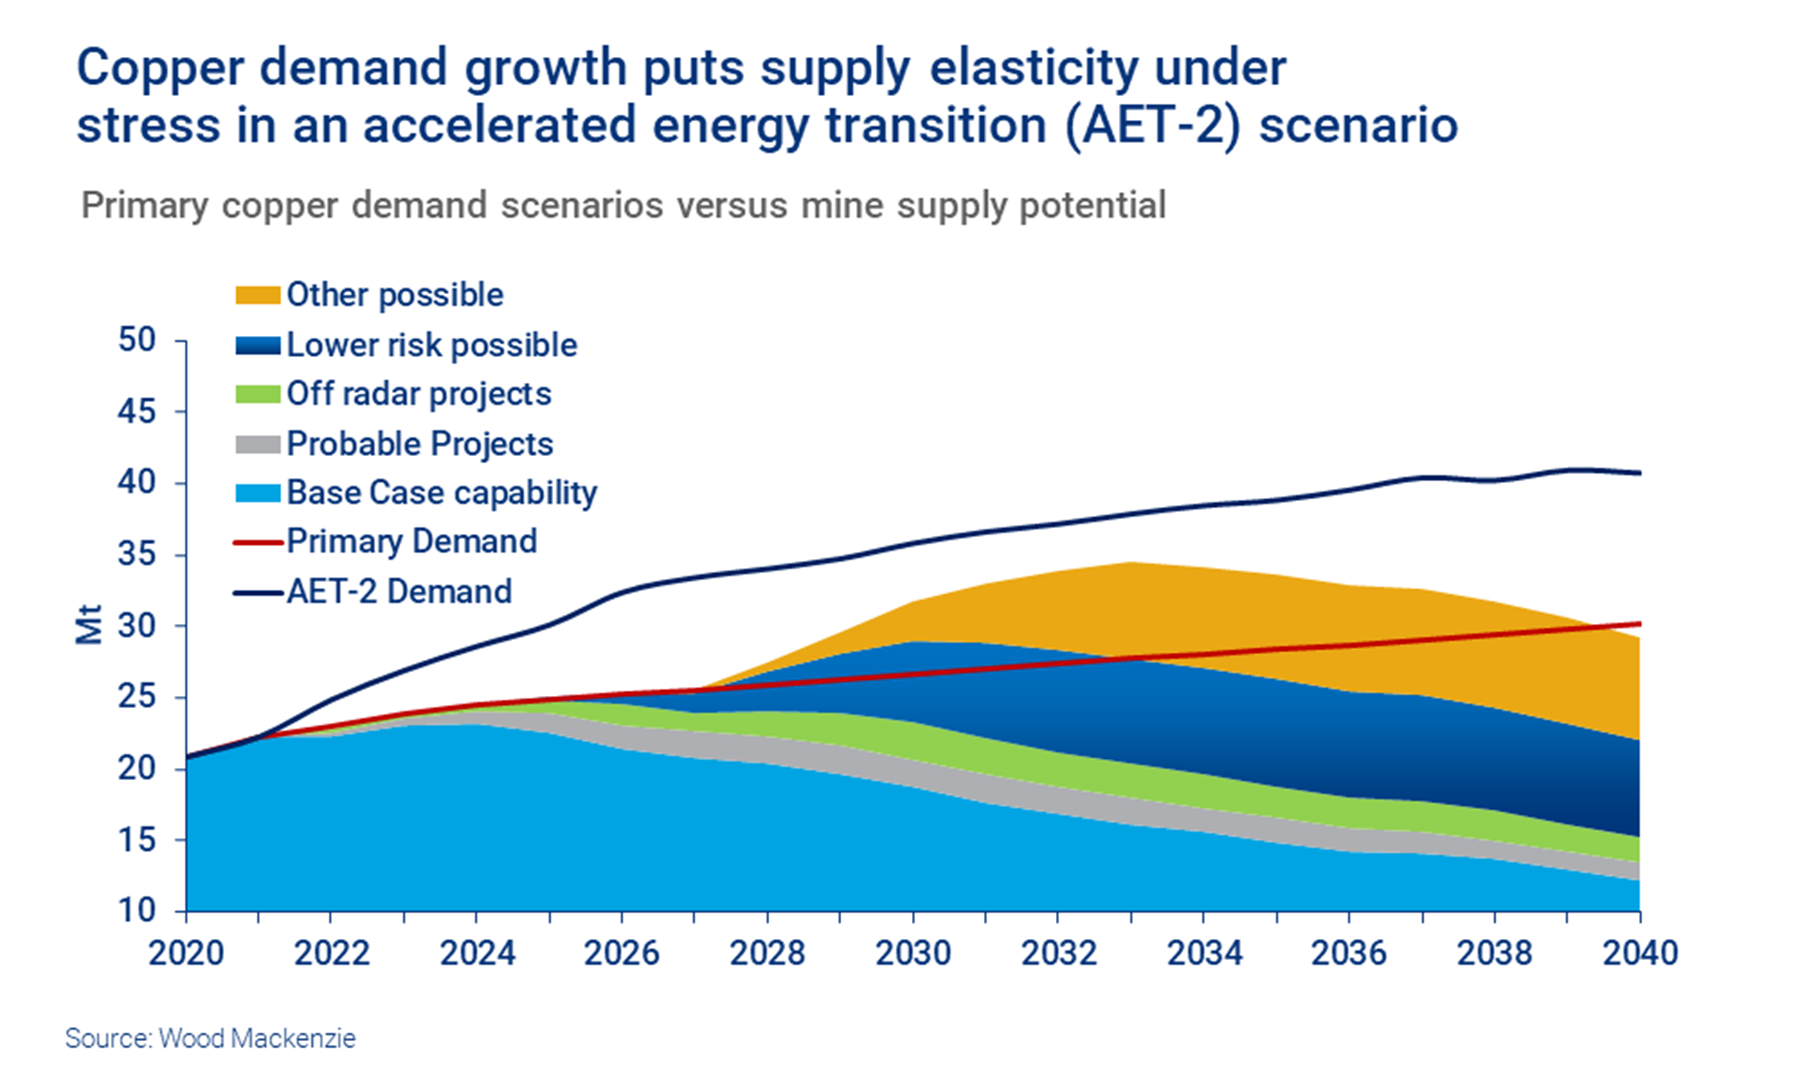 Copper demand growth puts supply elasticity under stress in an accelerated energy transition scenario.